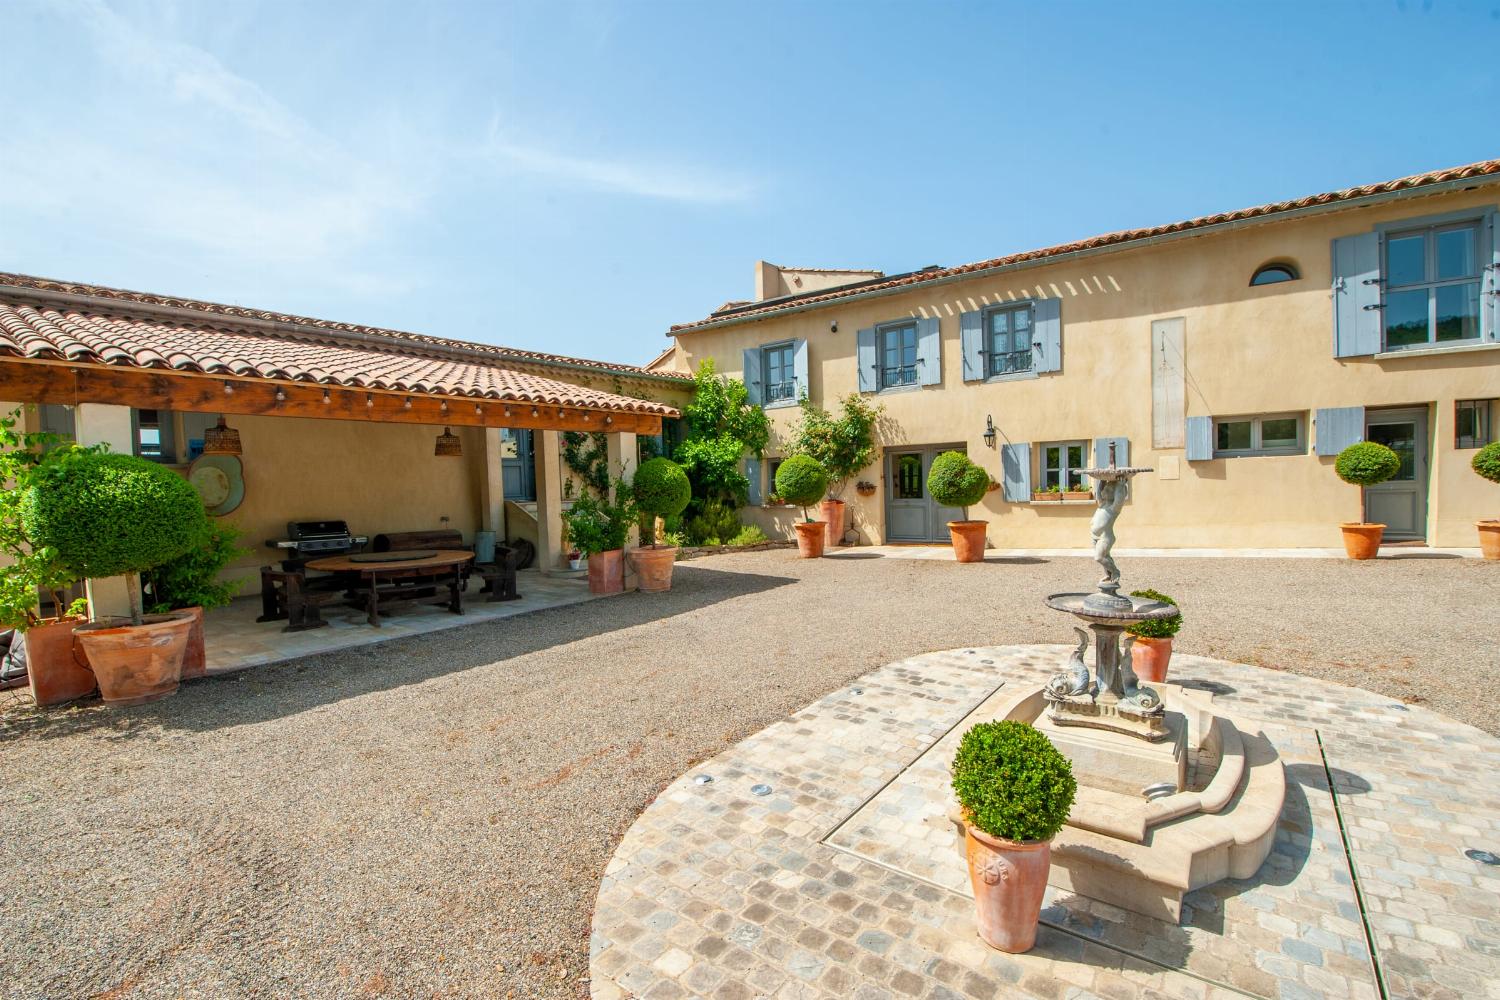 Holiday accommodation in the South of France